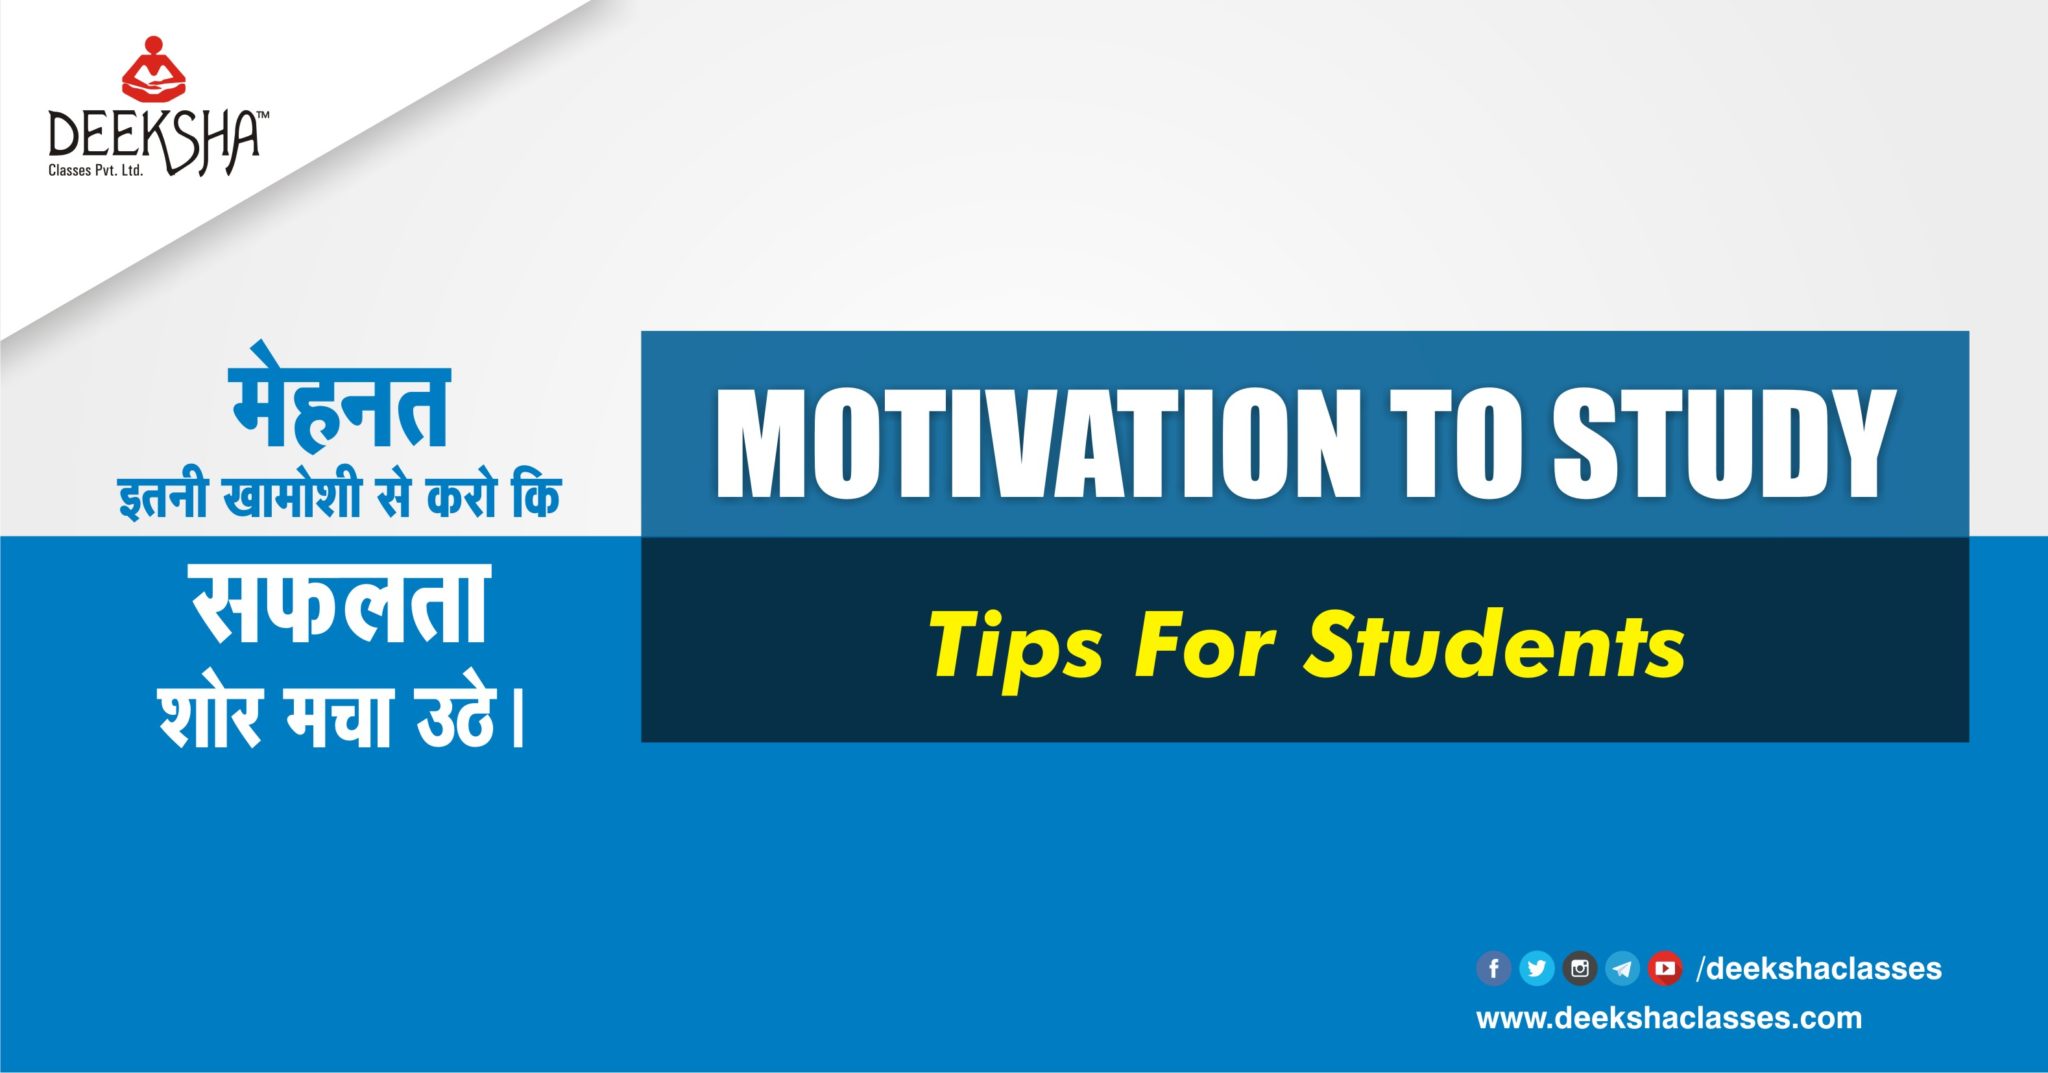 Motivation to study – Tips for students